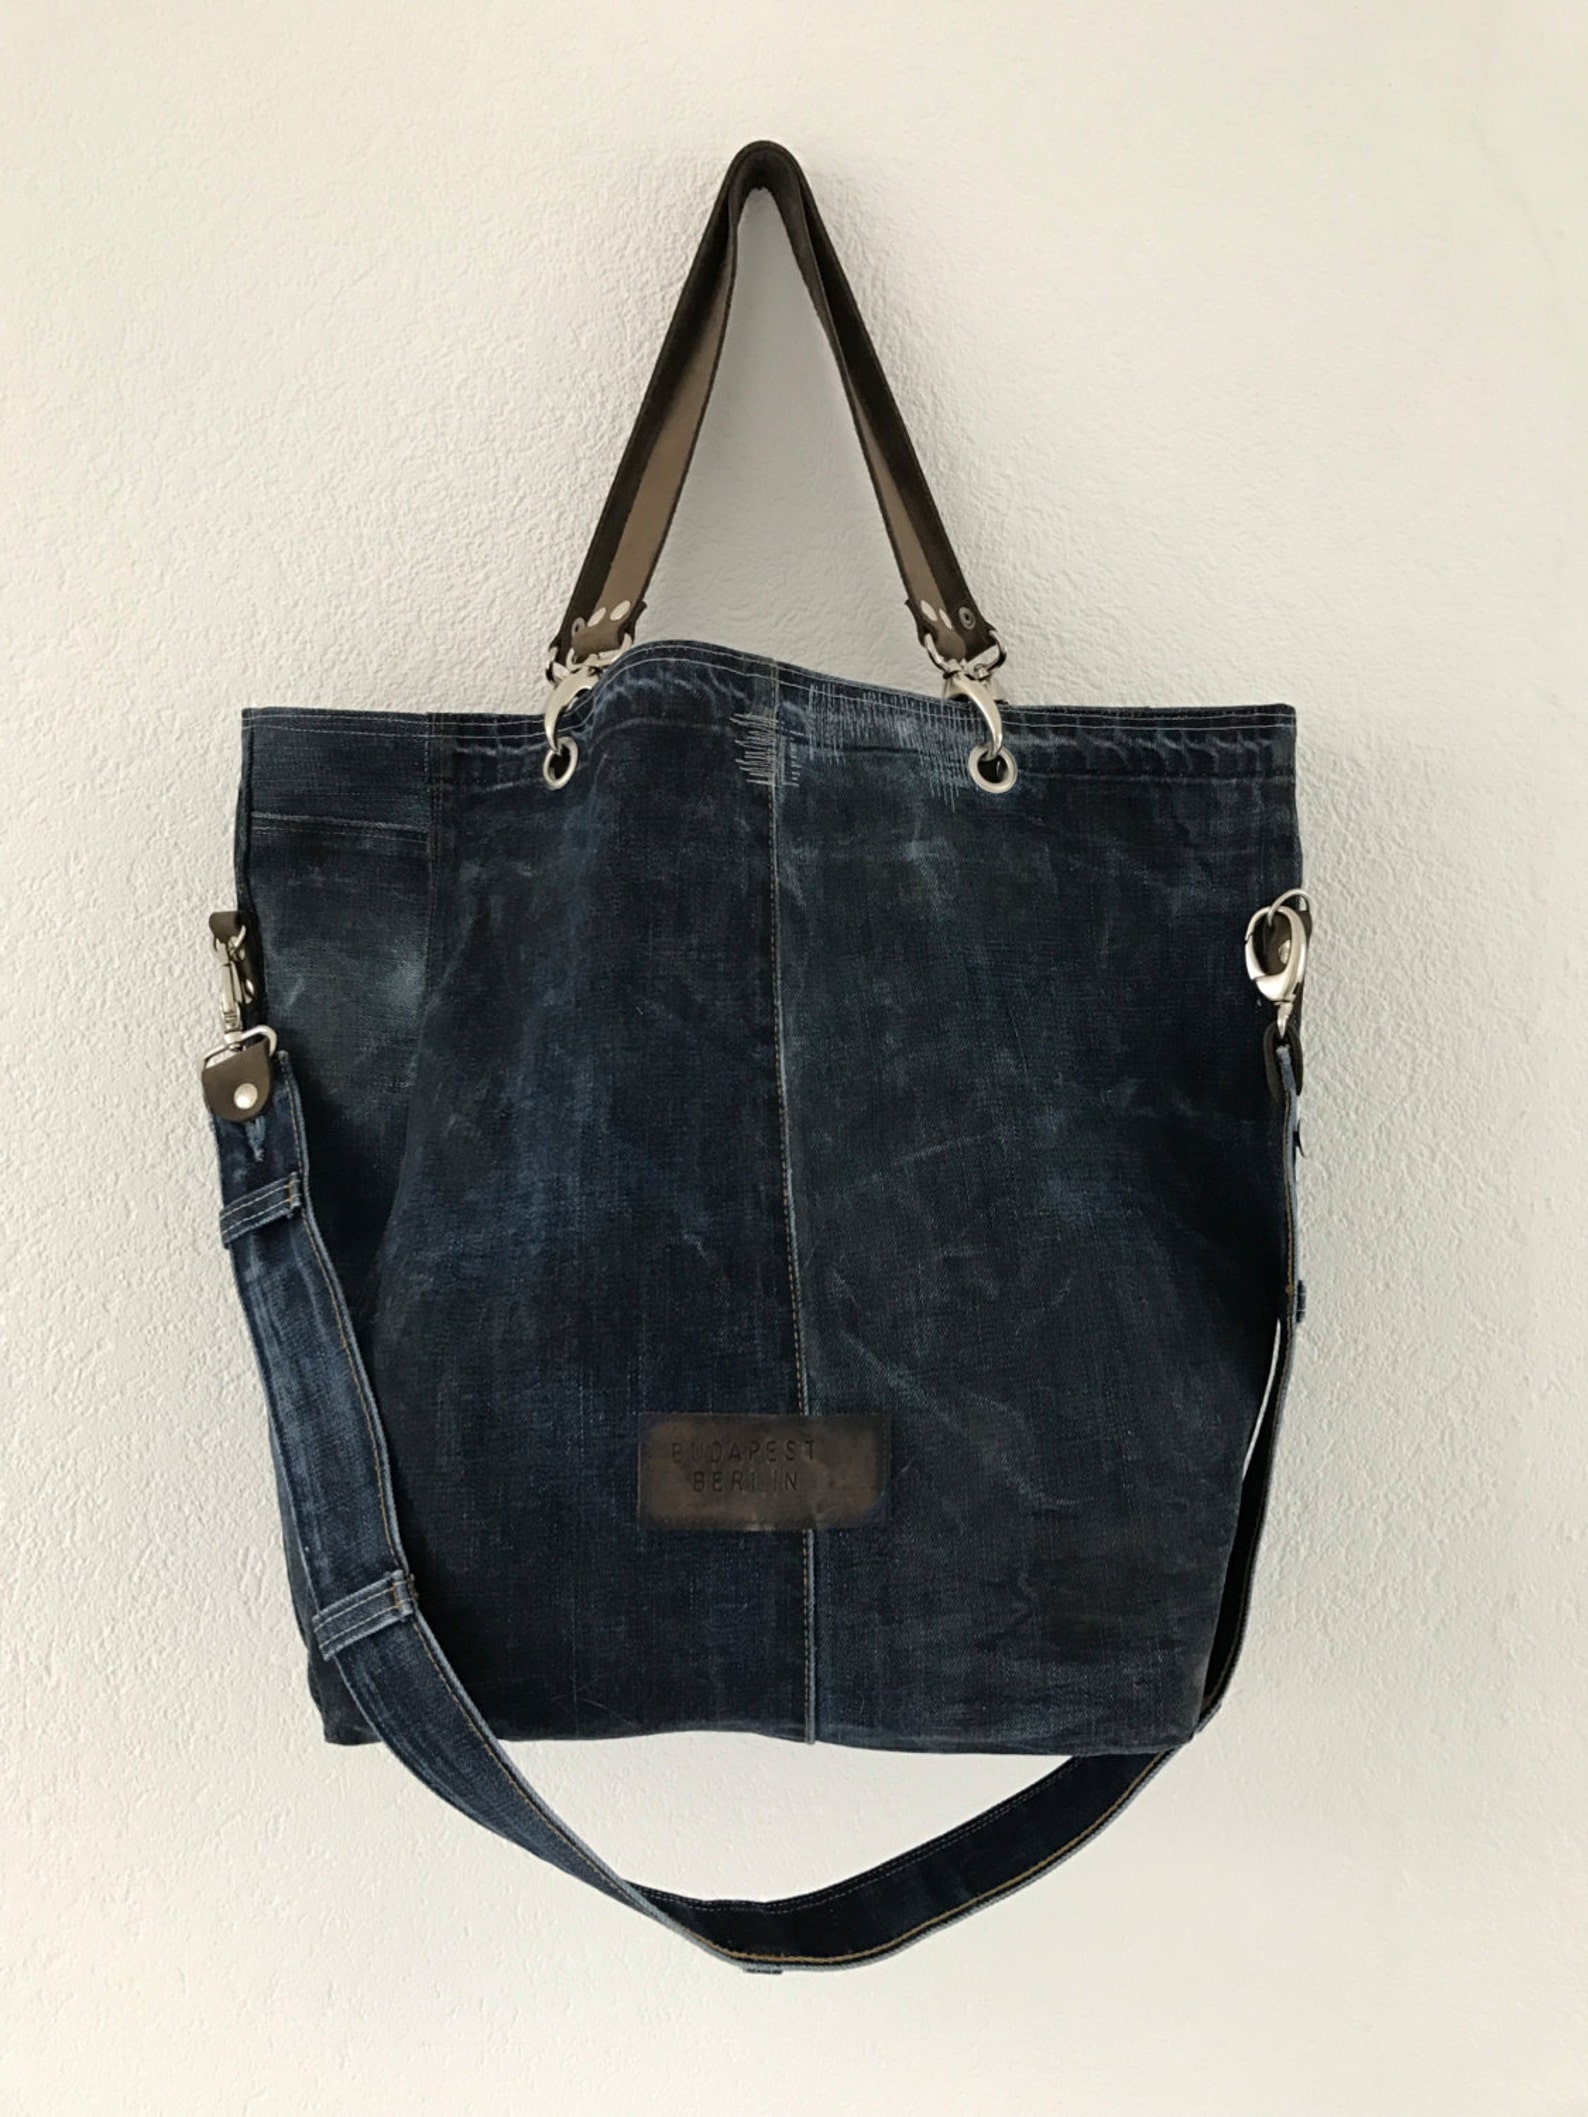 Large waxed denim and leather tote bag market bag | Etsy